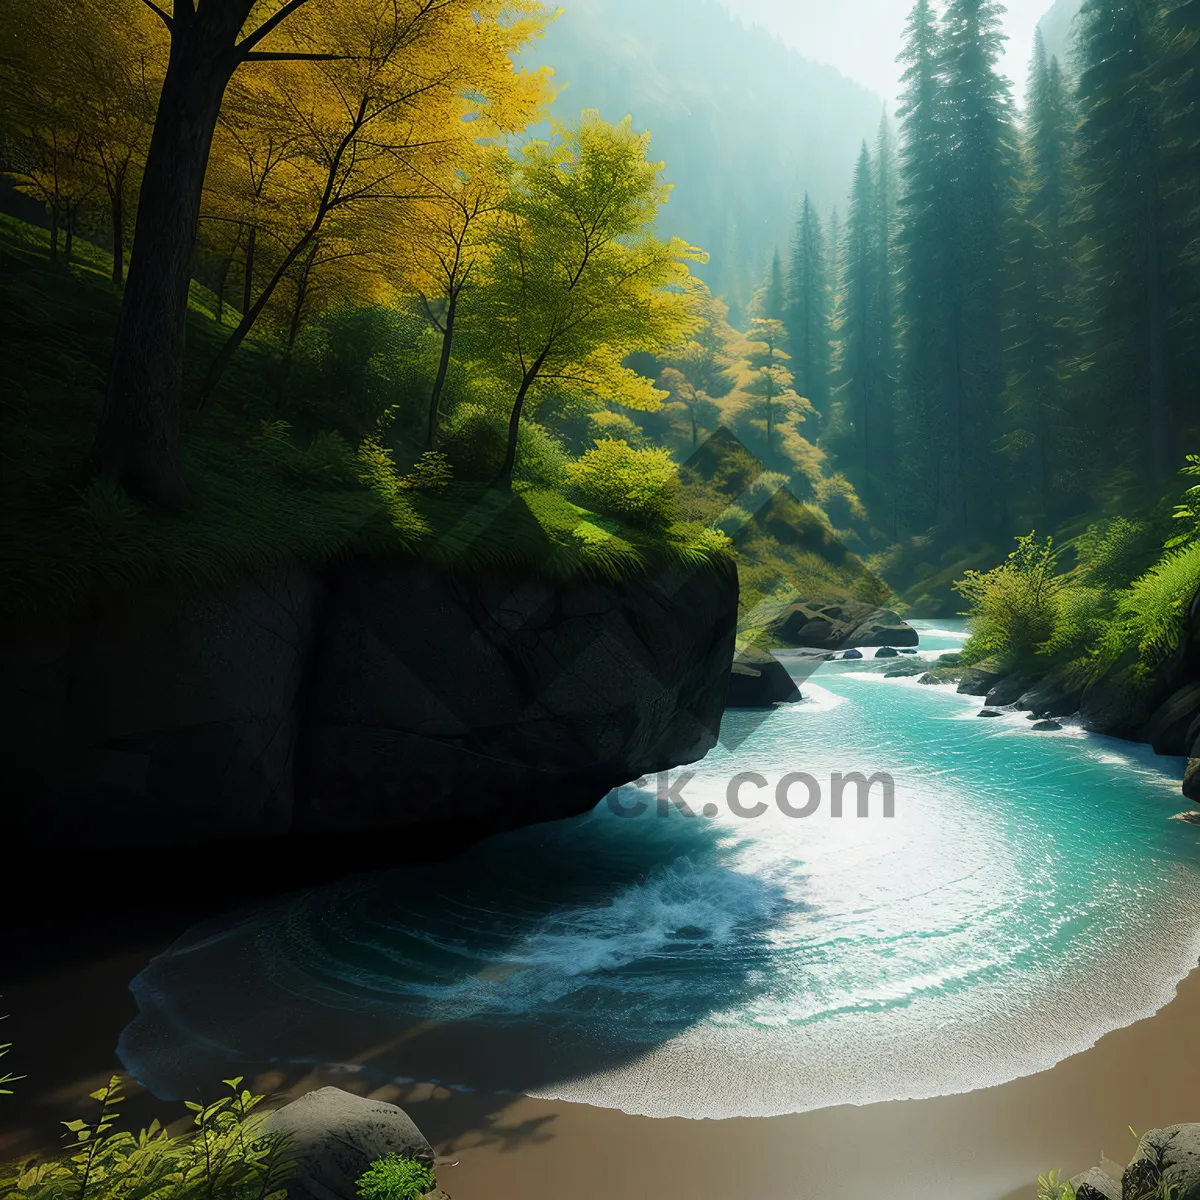 Picture of Majestic River Canyon Amidst Lush Forest